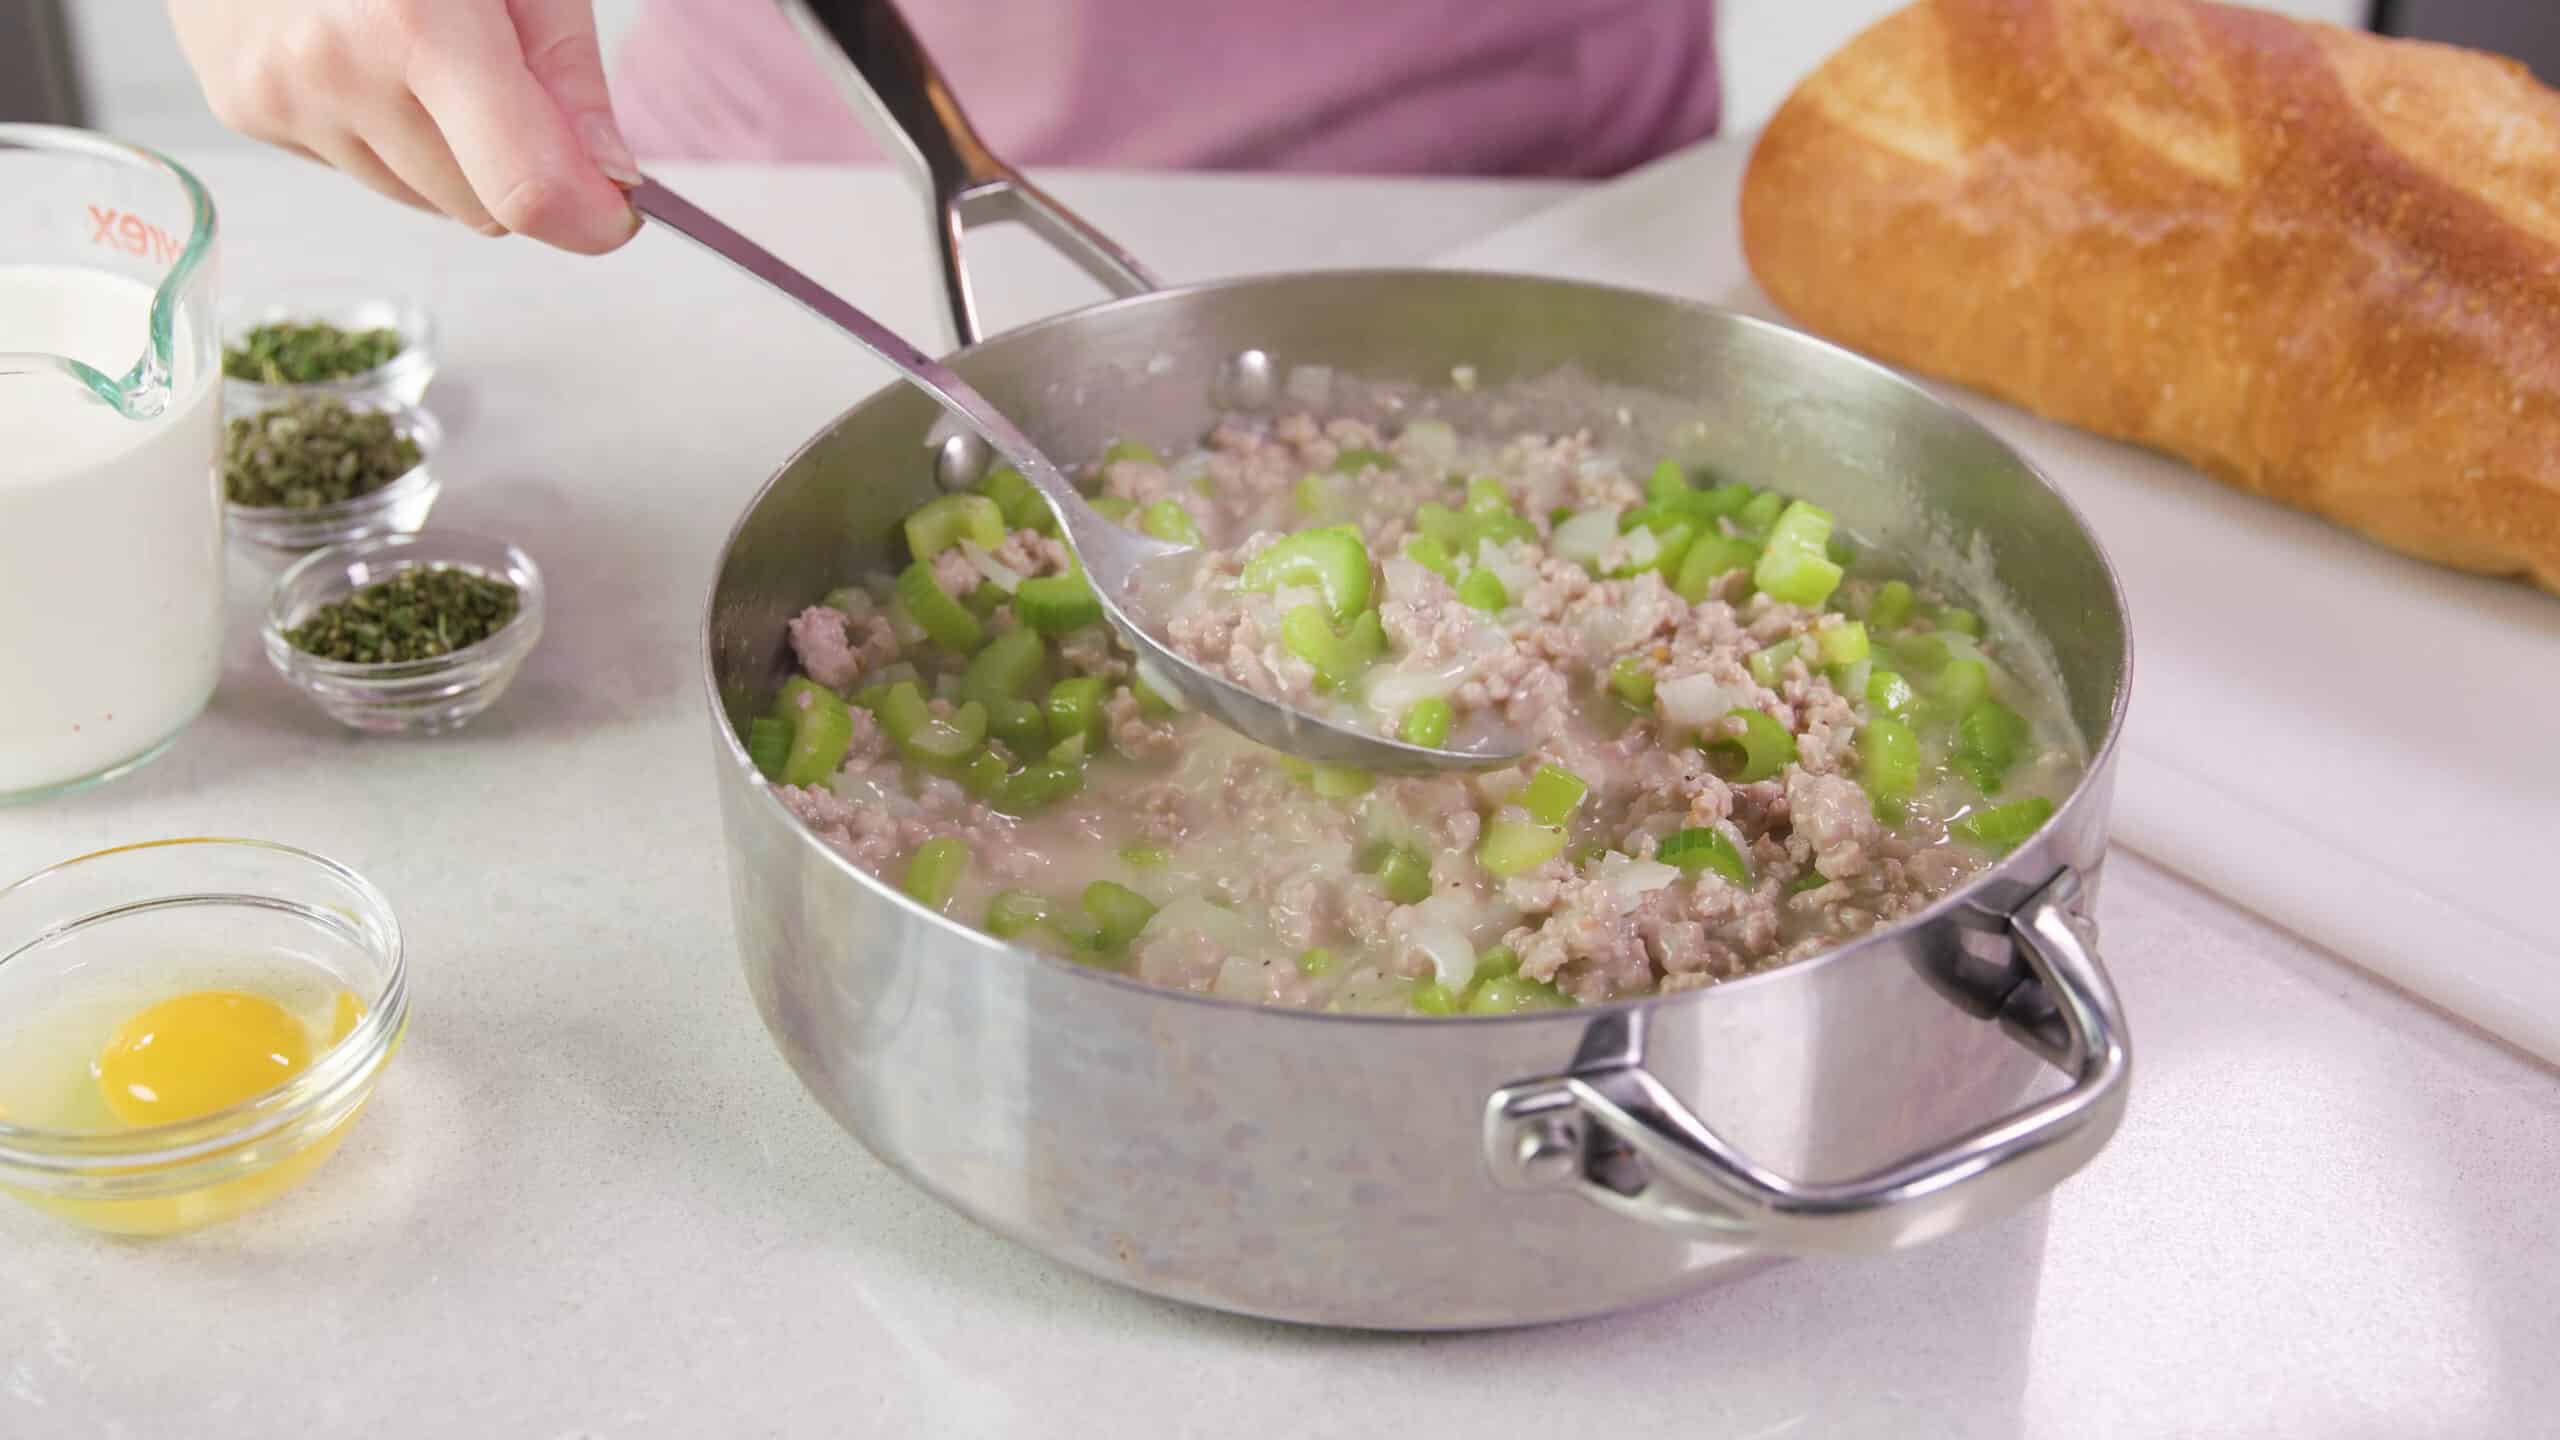 Angled view of high-rim saucepan filled with sausage, celery, onion and seasoning mixture with a metal spoon lifting a portion up to show texture.